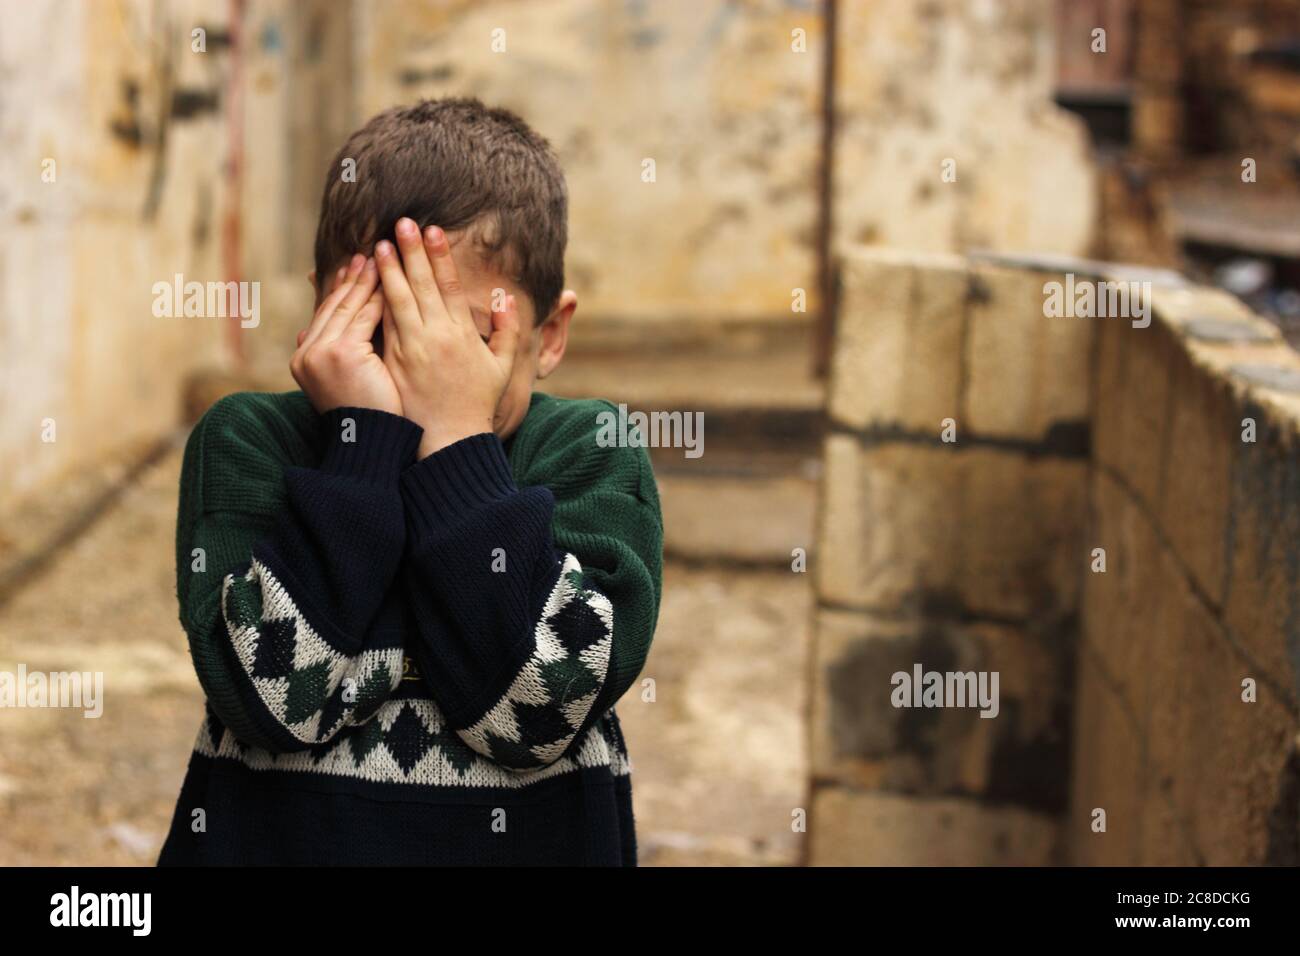 a poor Syrian child in slum covering his face with his hands, sneak peaking in between Stock Photo